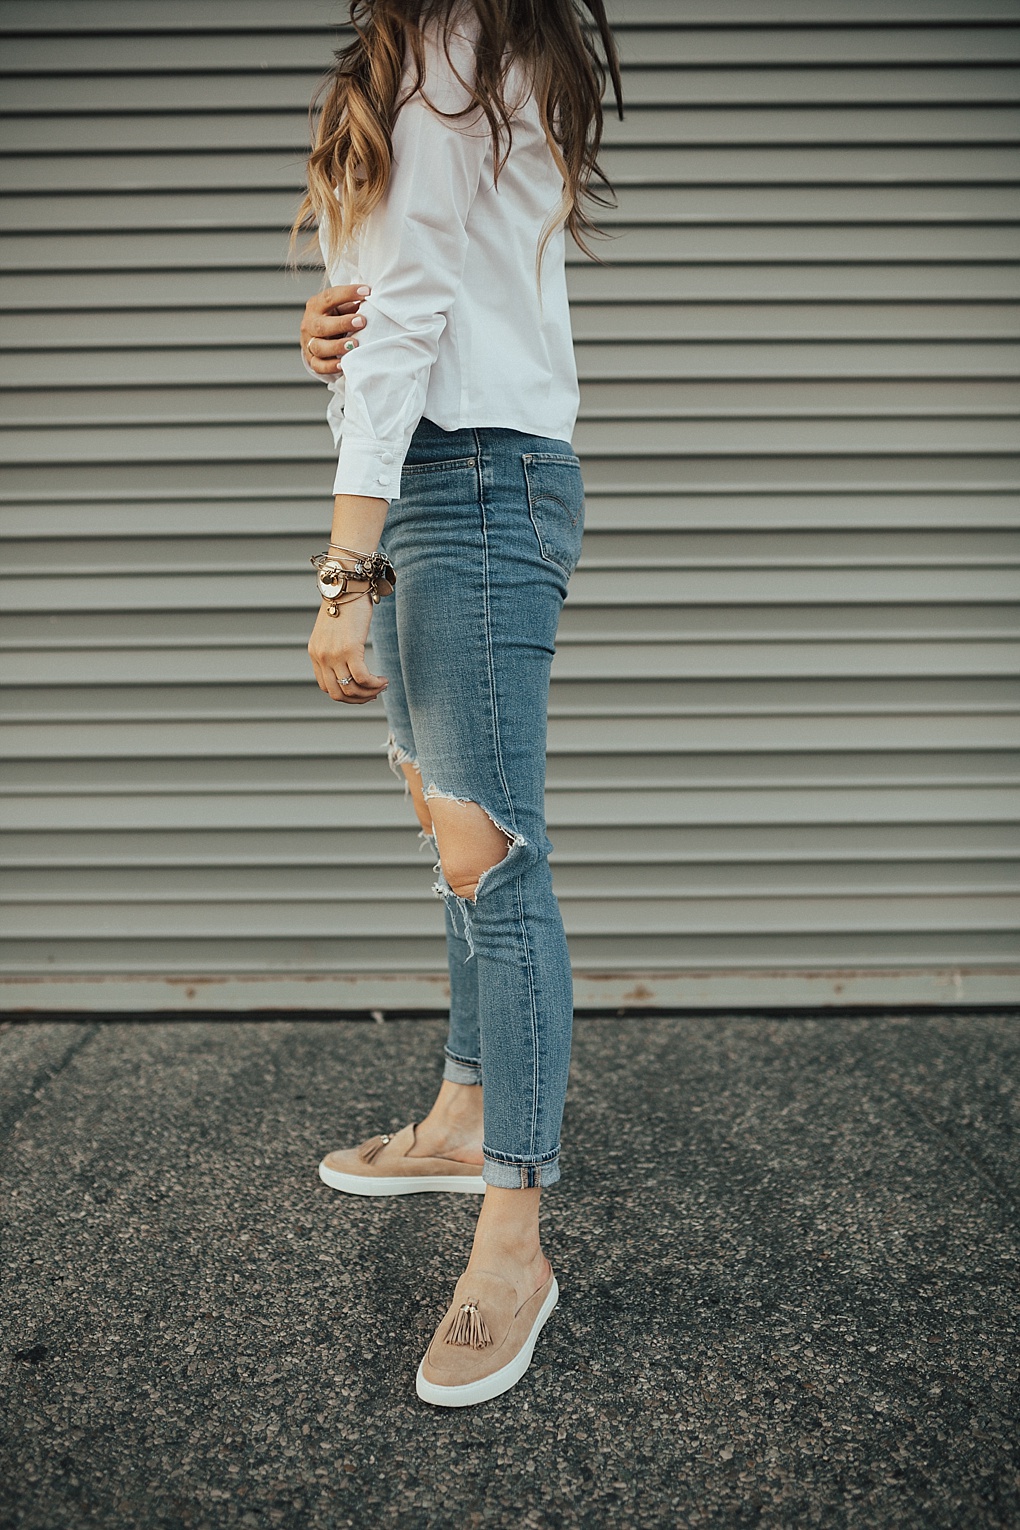 How To Pair A Dressy Ruffle Top with Jeans by Utah fashion blogger Dani Marie